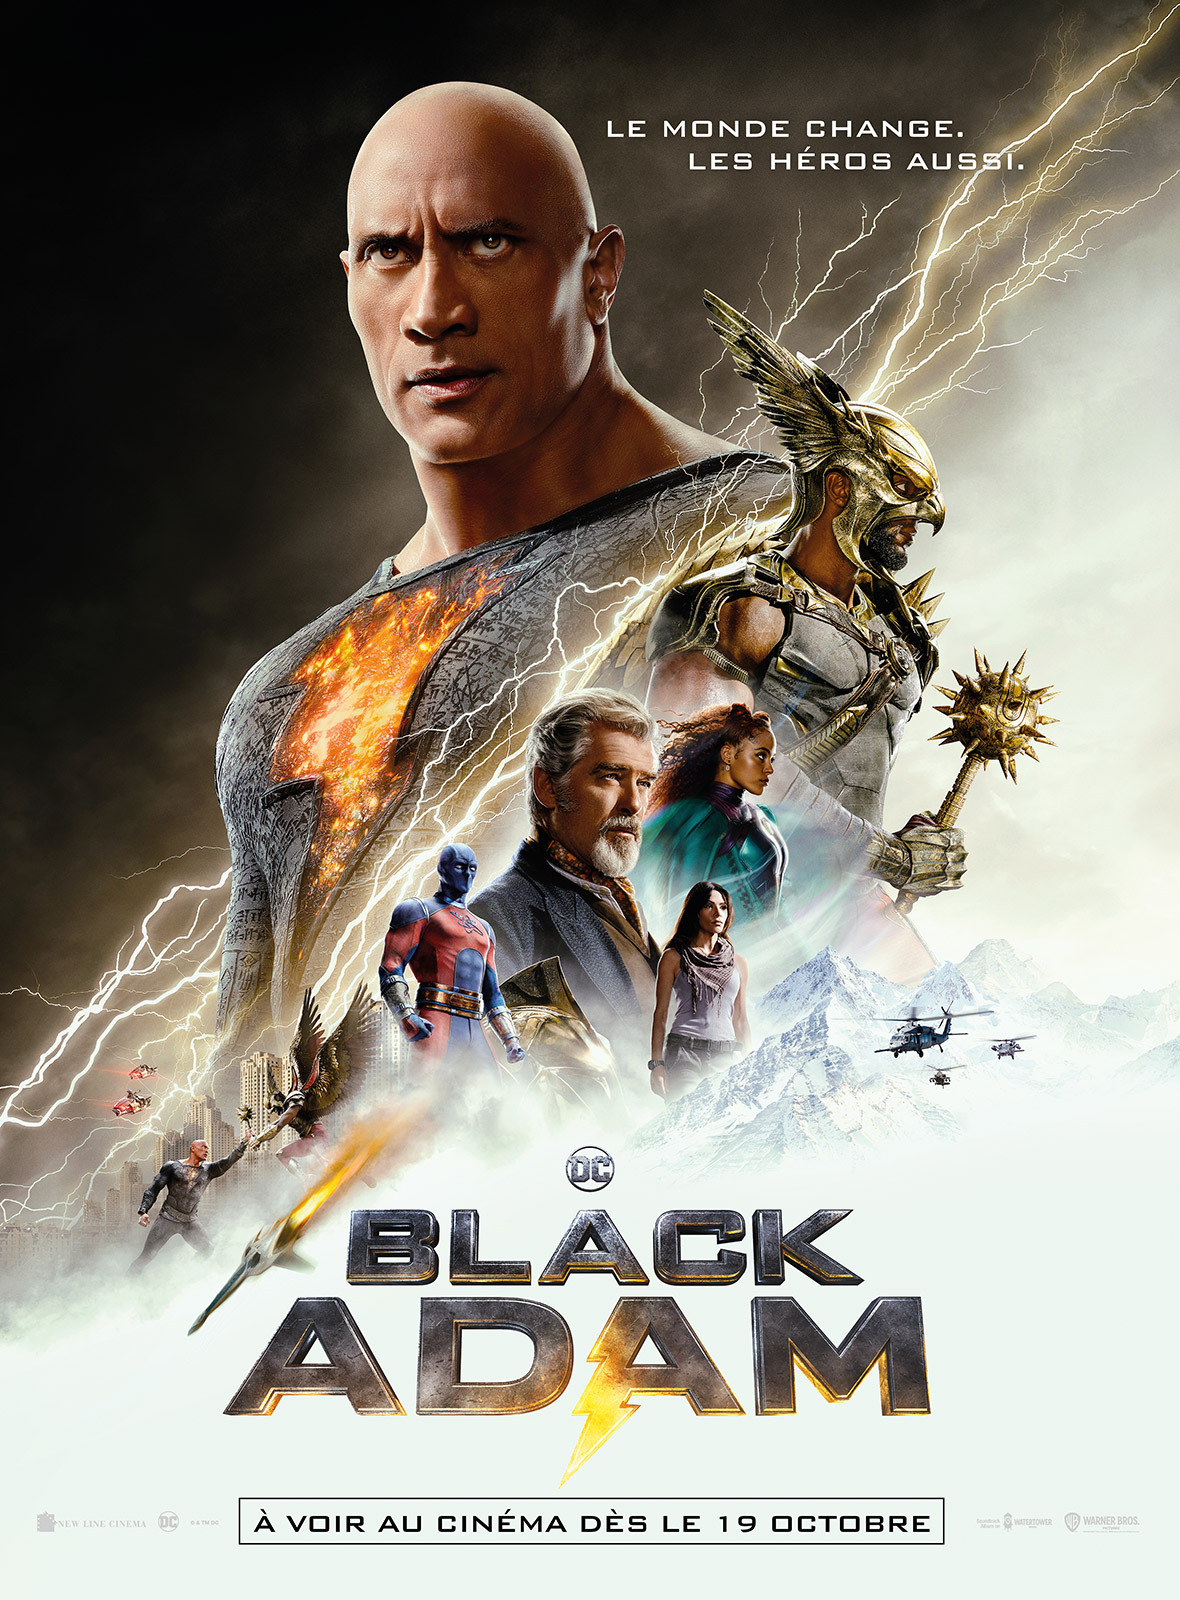 Black Adam - Copyright 2022 Warner Bros. Entertainment Inc. All Rights Reserved.